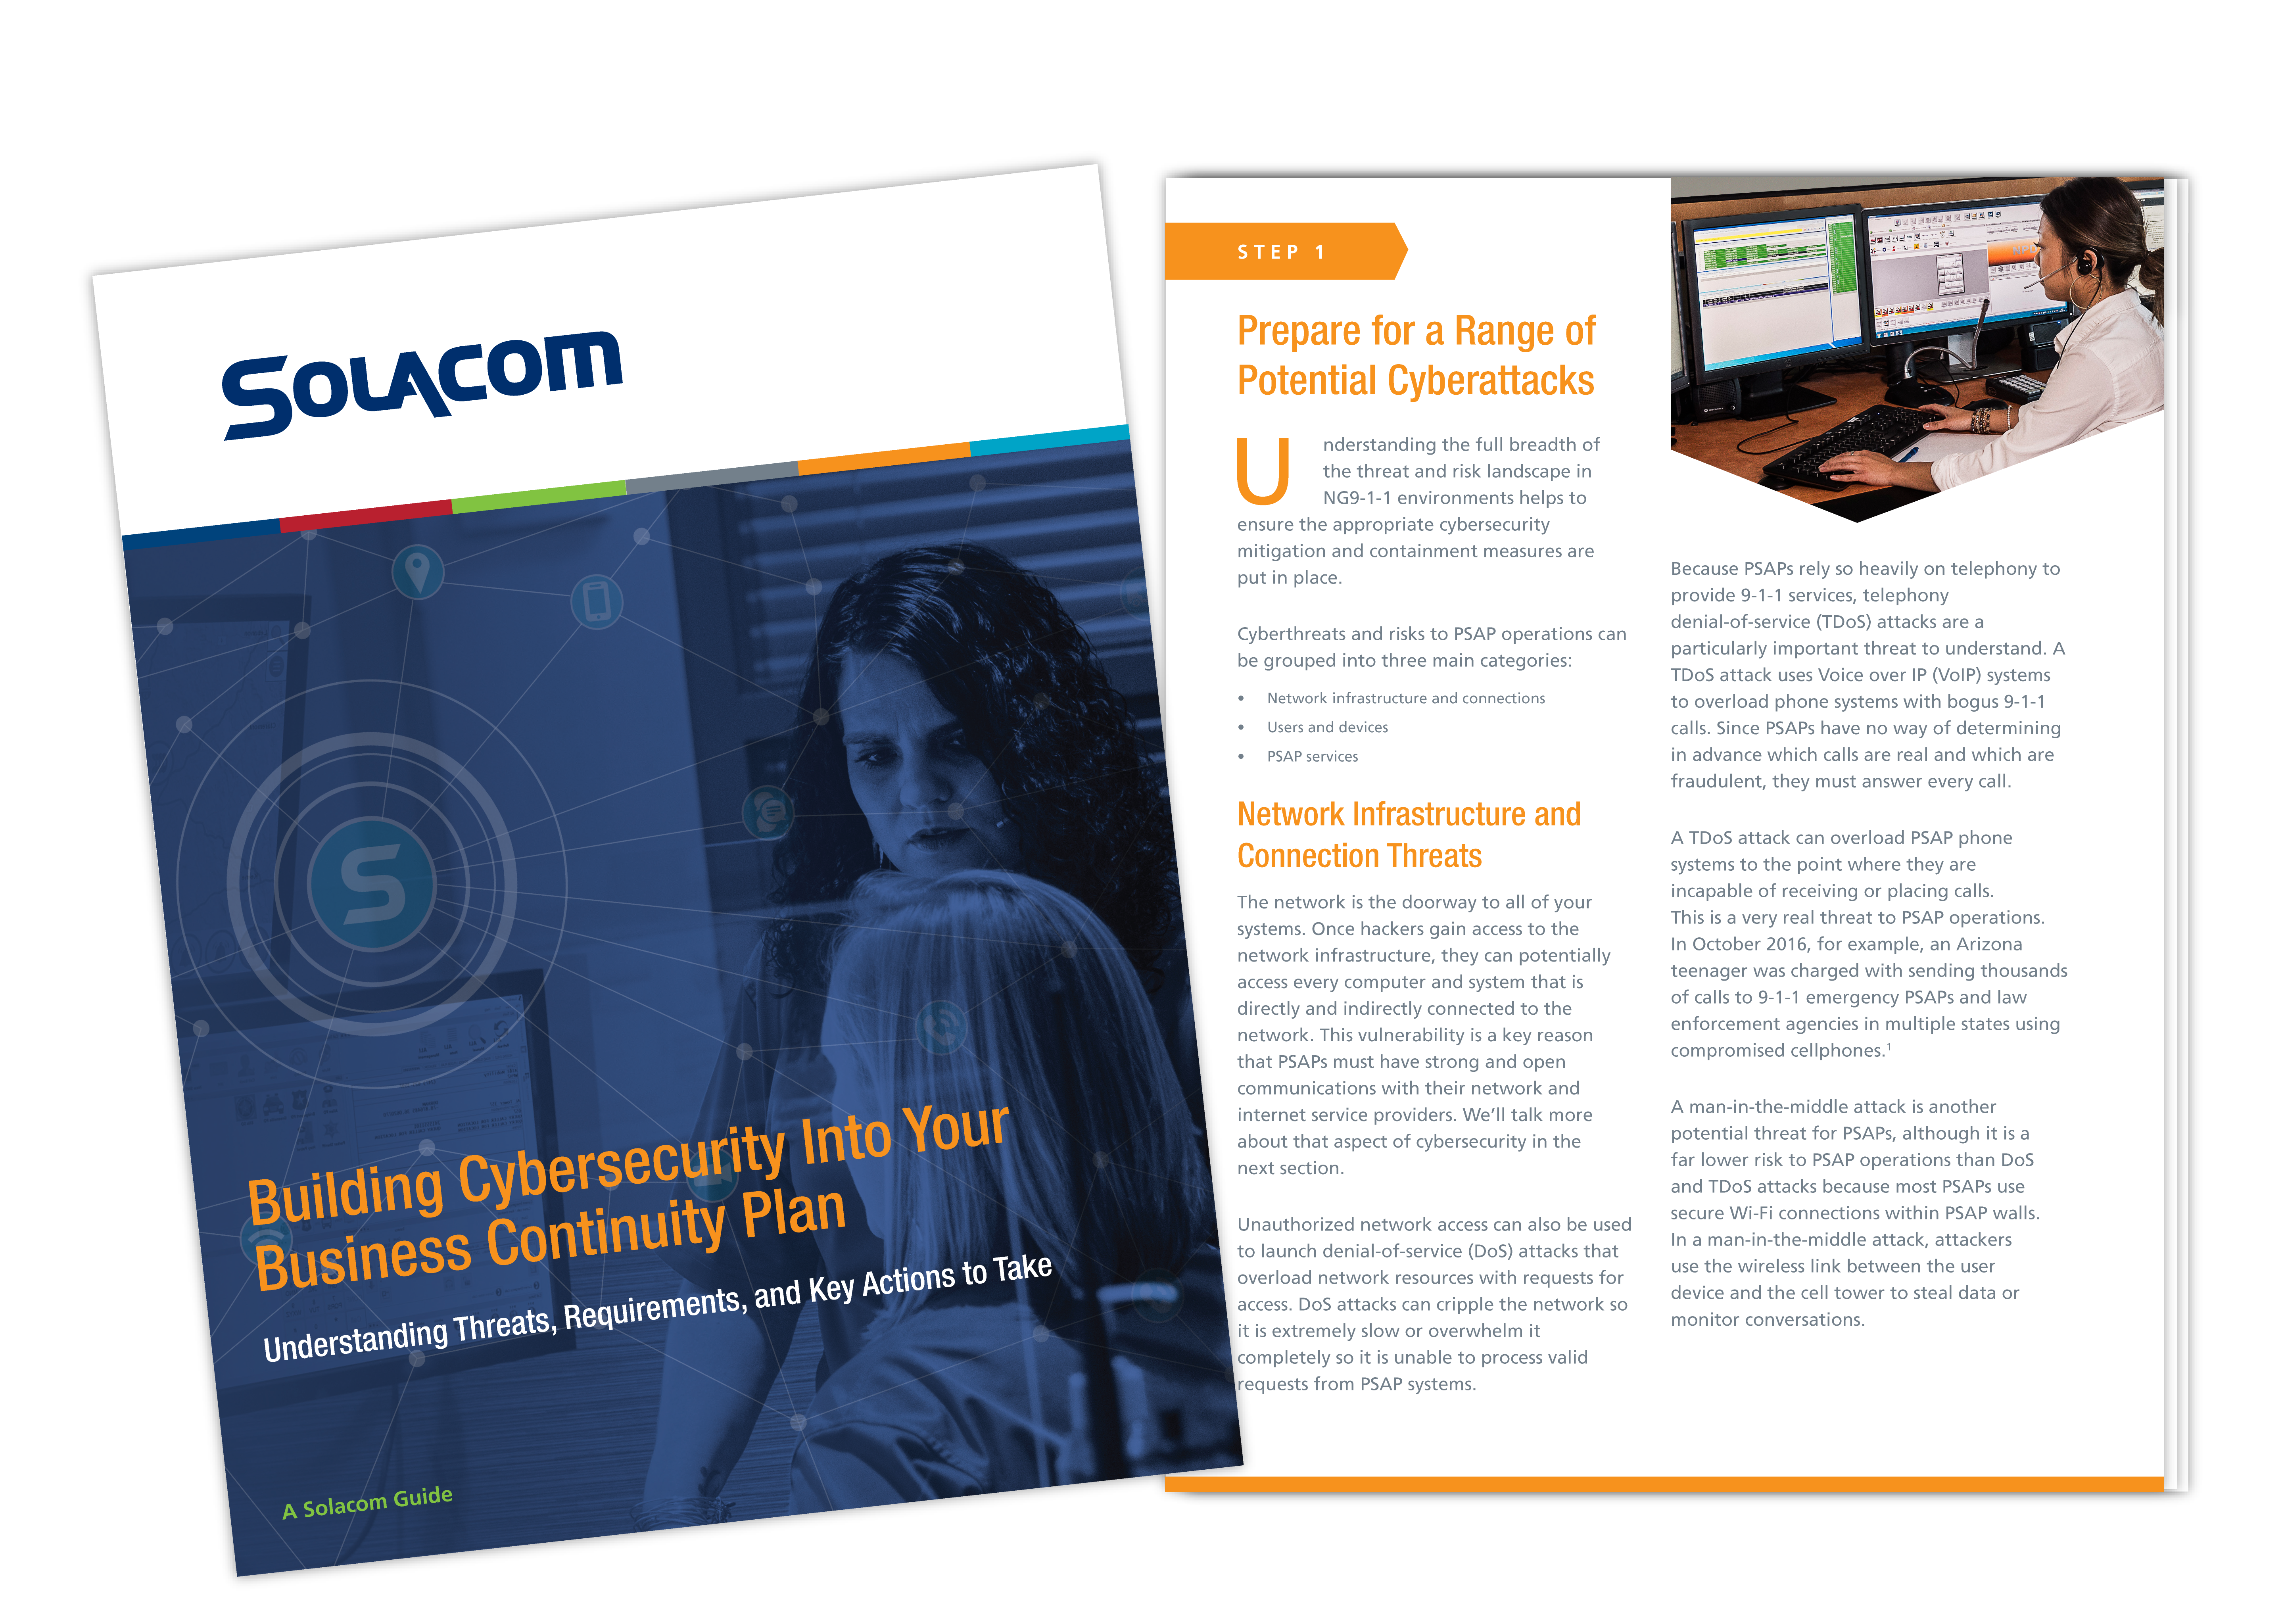 Building Cybersecurity Into Your Business Continuity Plan, a Solacom guide